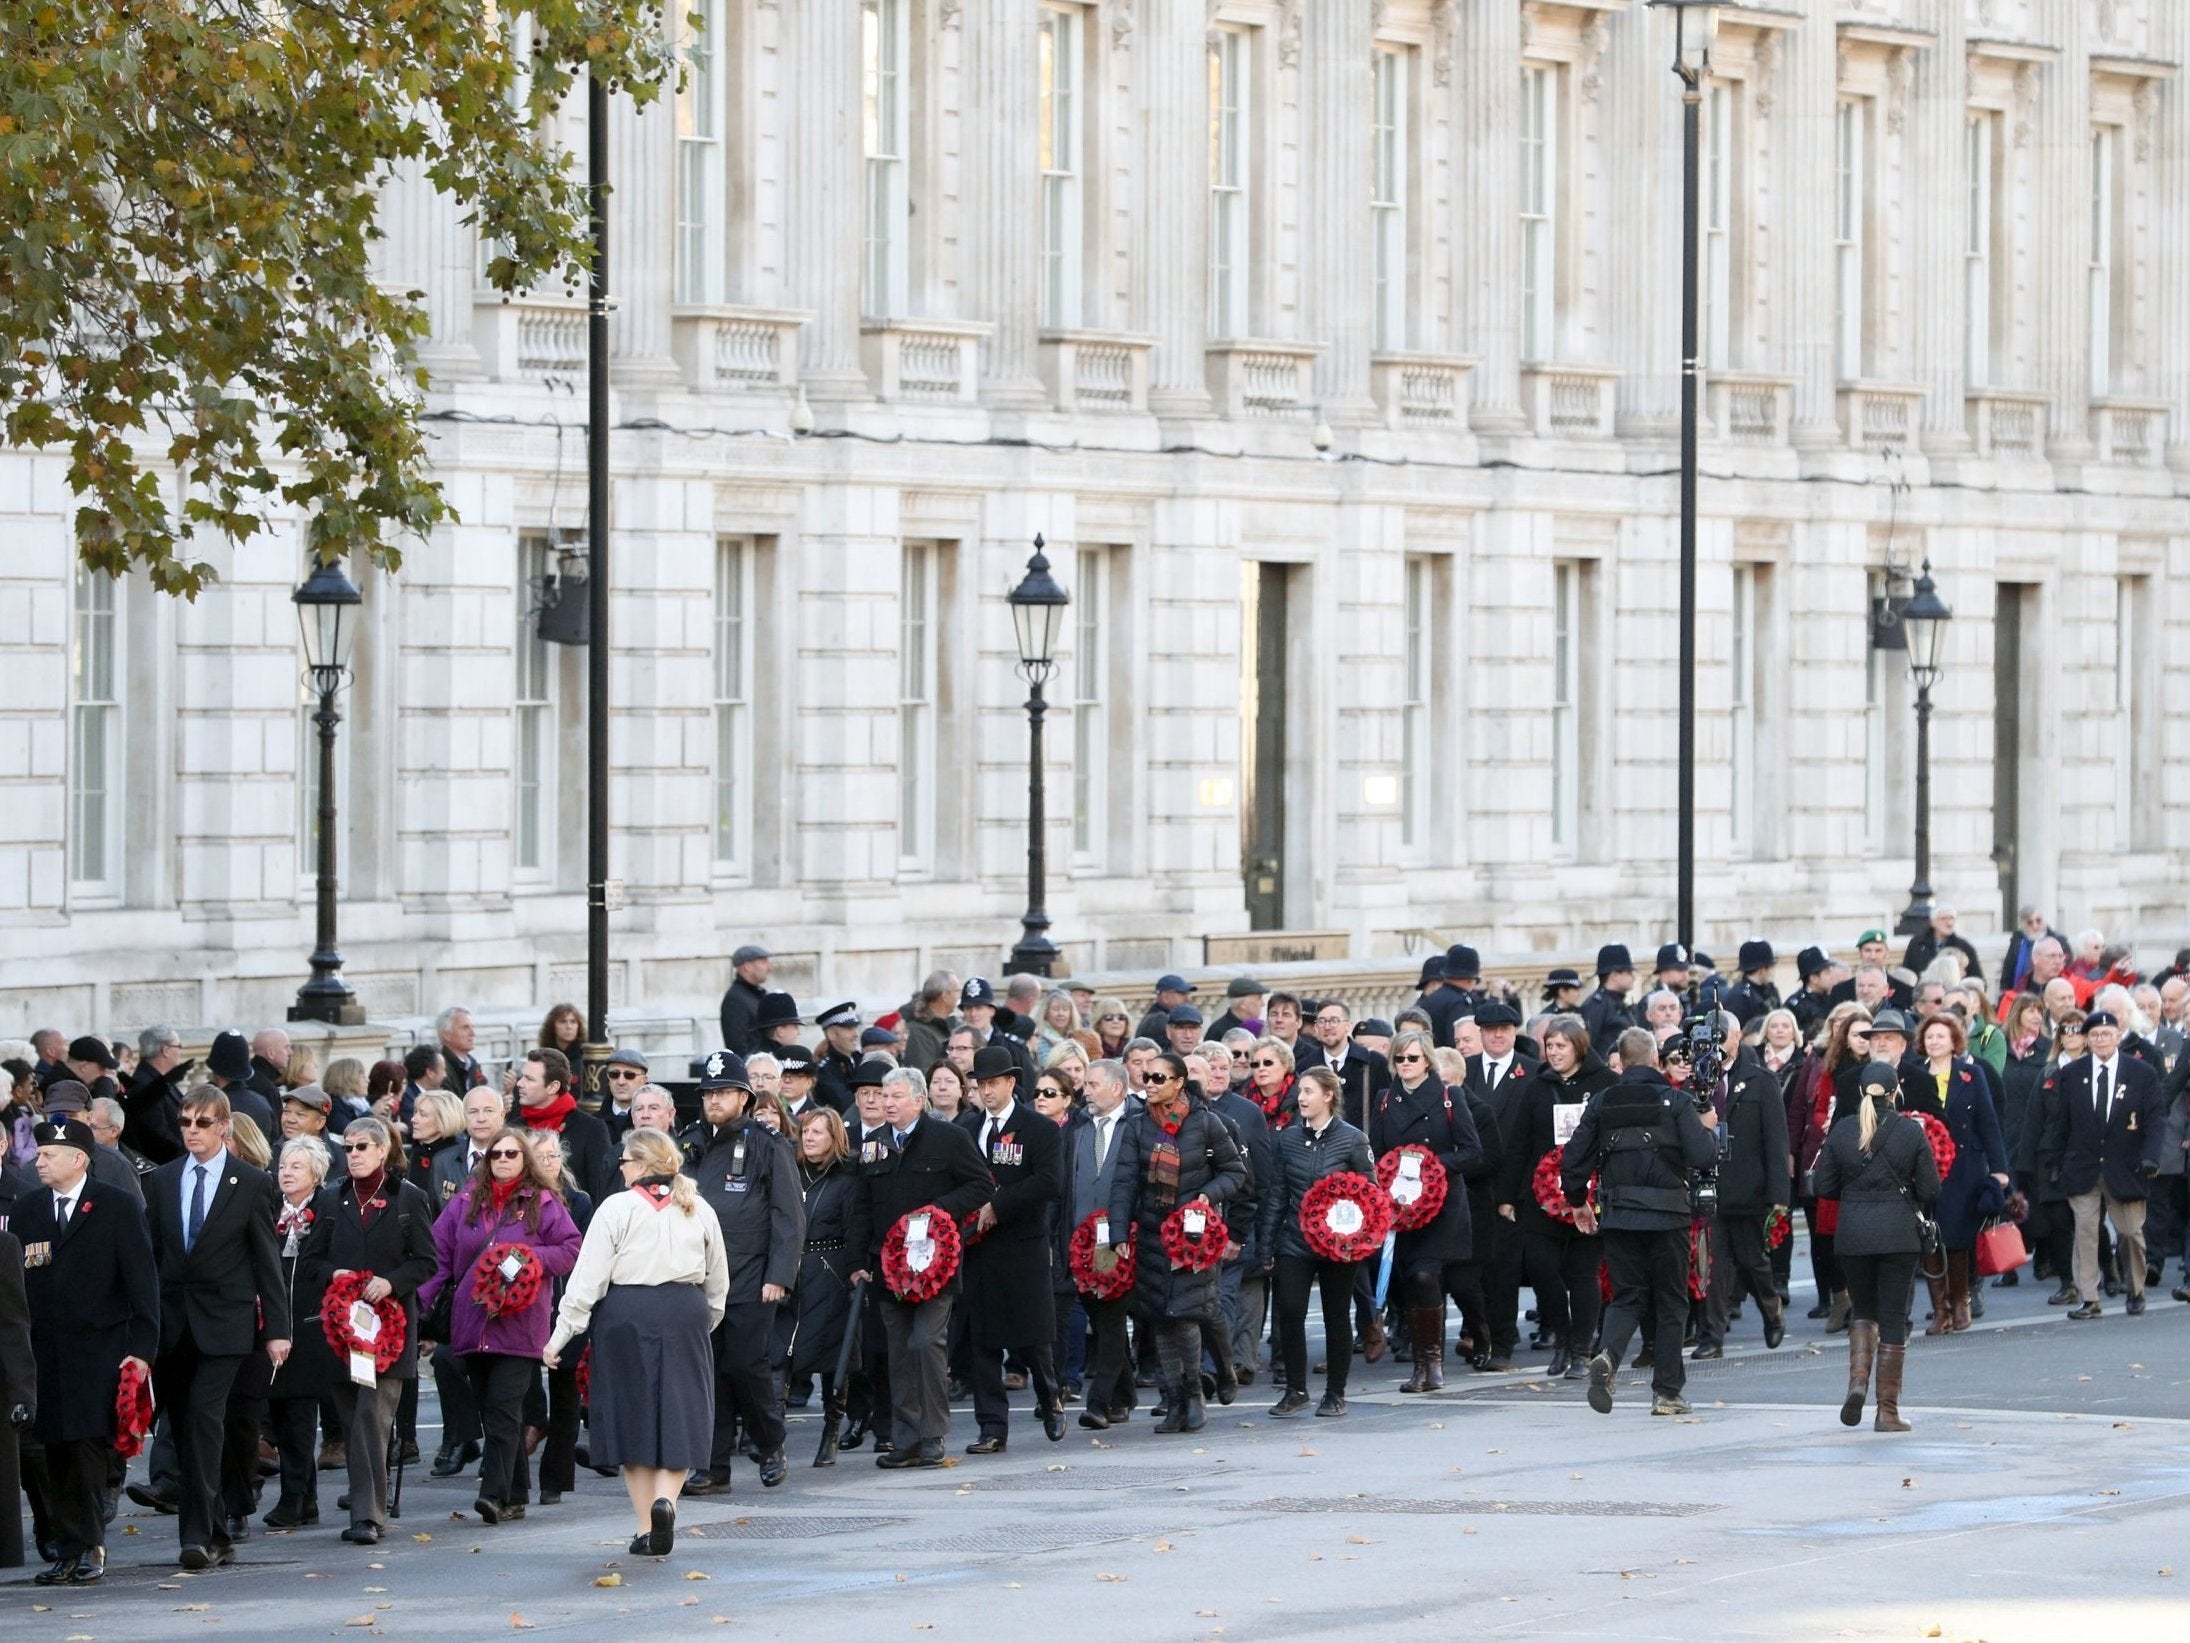 10,000 people walked down Whitehall on Remembrance Day